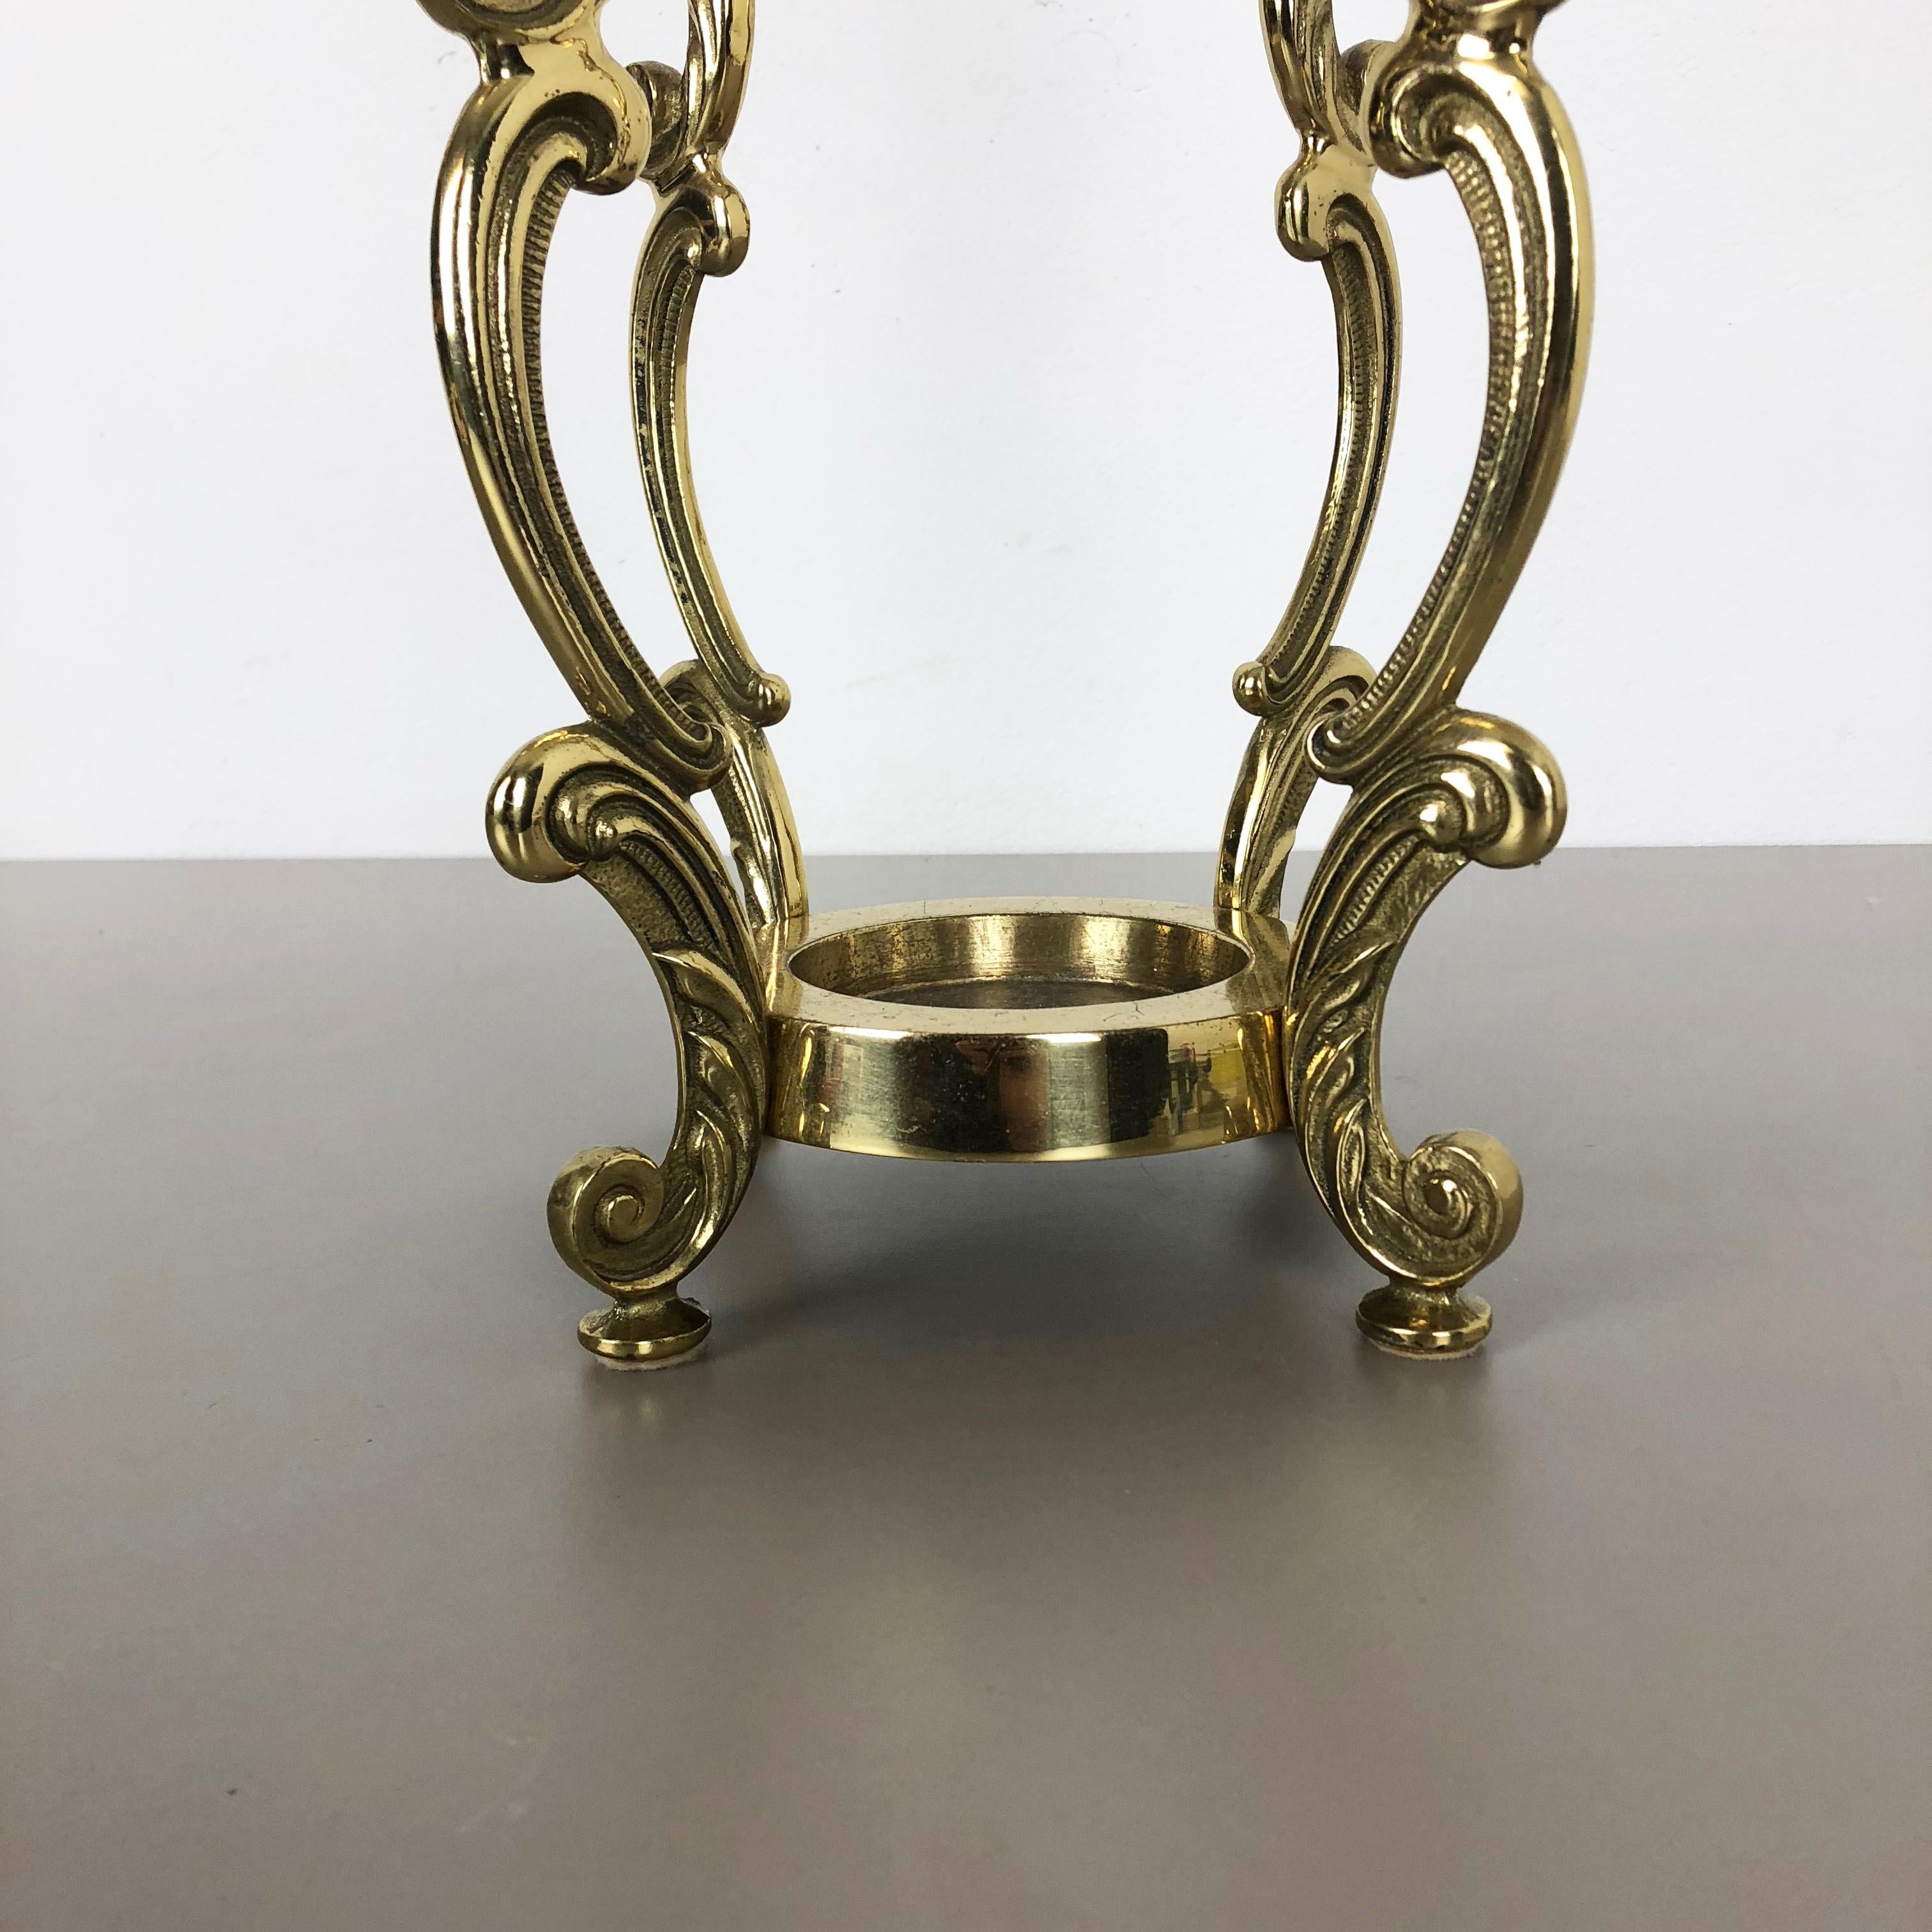 Original Hollywood Regency Solid Brass Umbrella Stand, Italy, 1970s For Sale 1